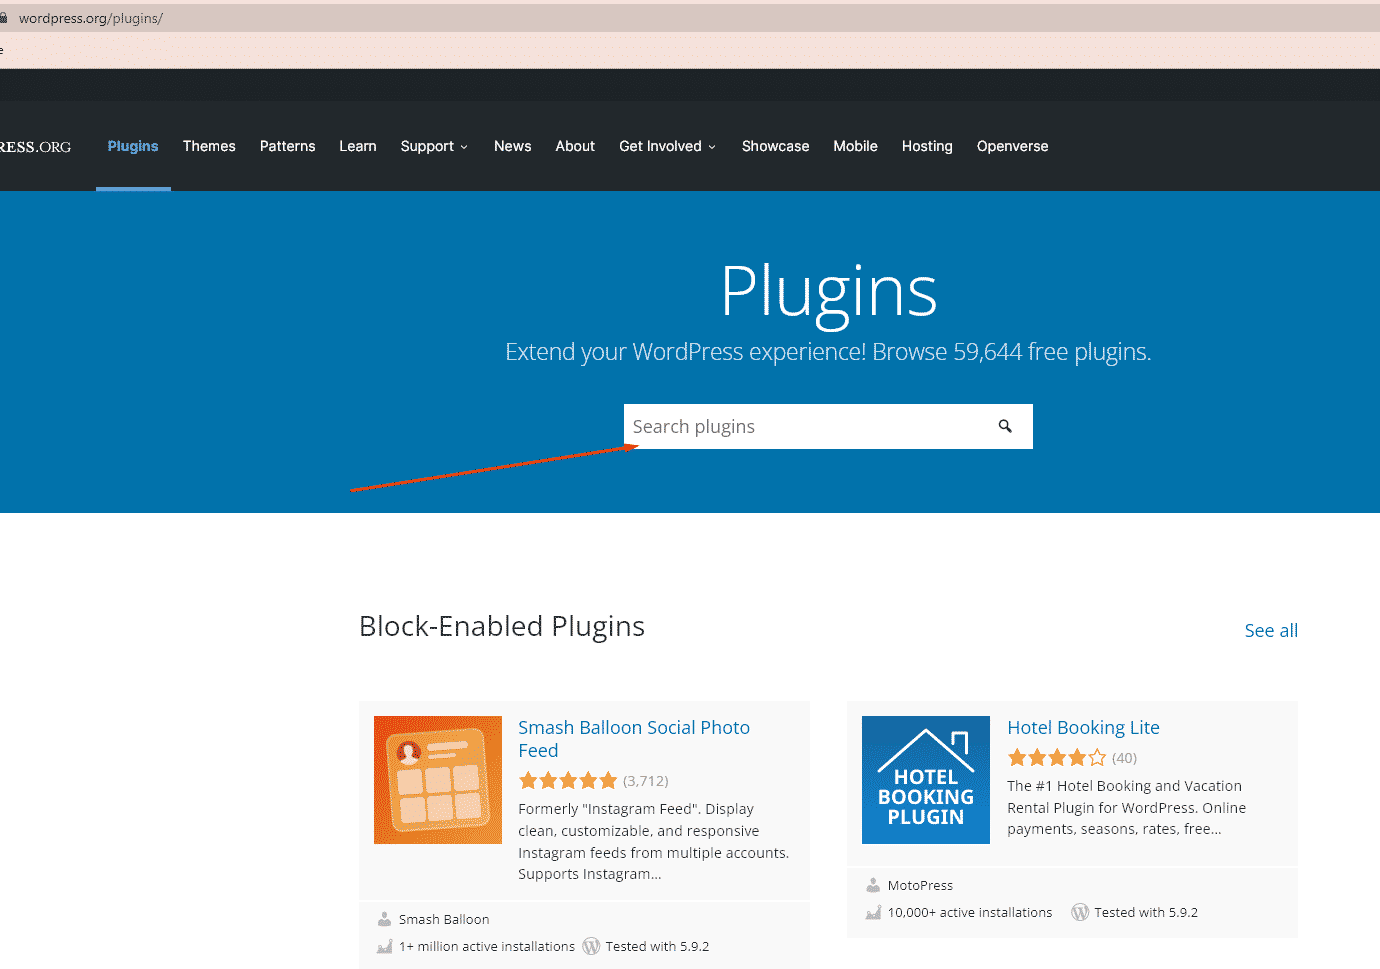 How to choose and install plugins for WordPress beginner